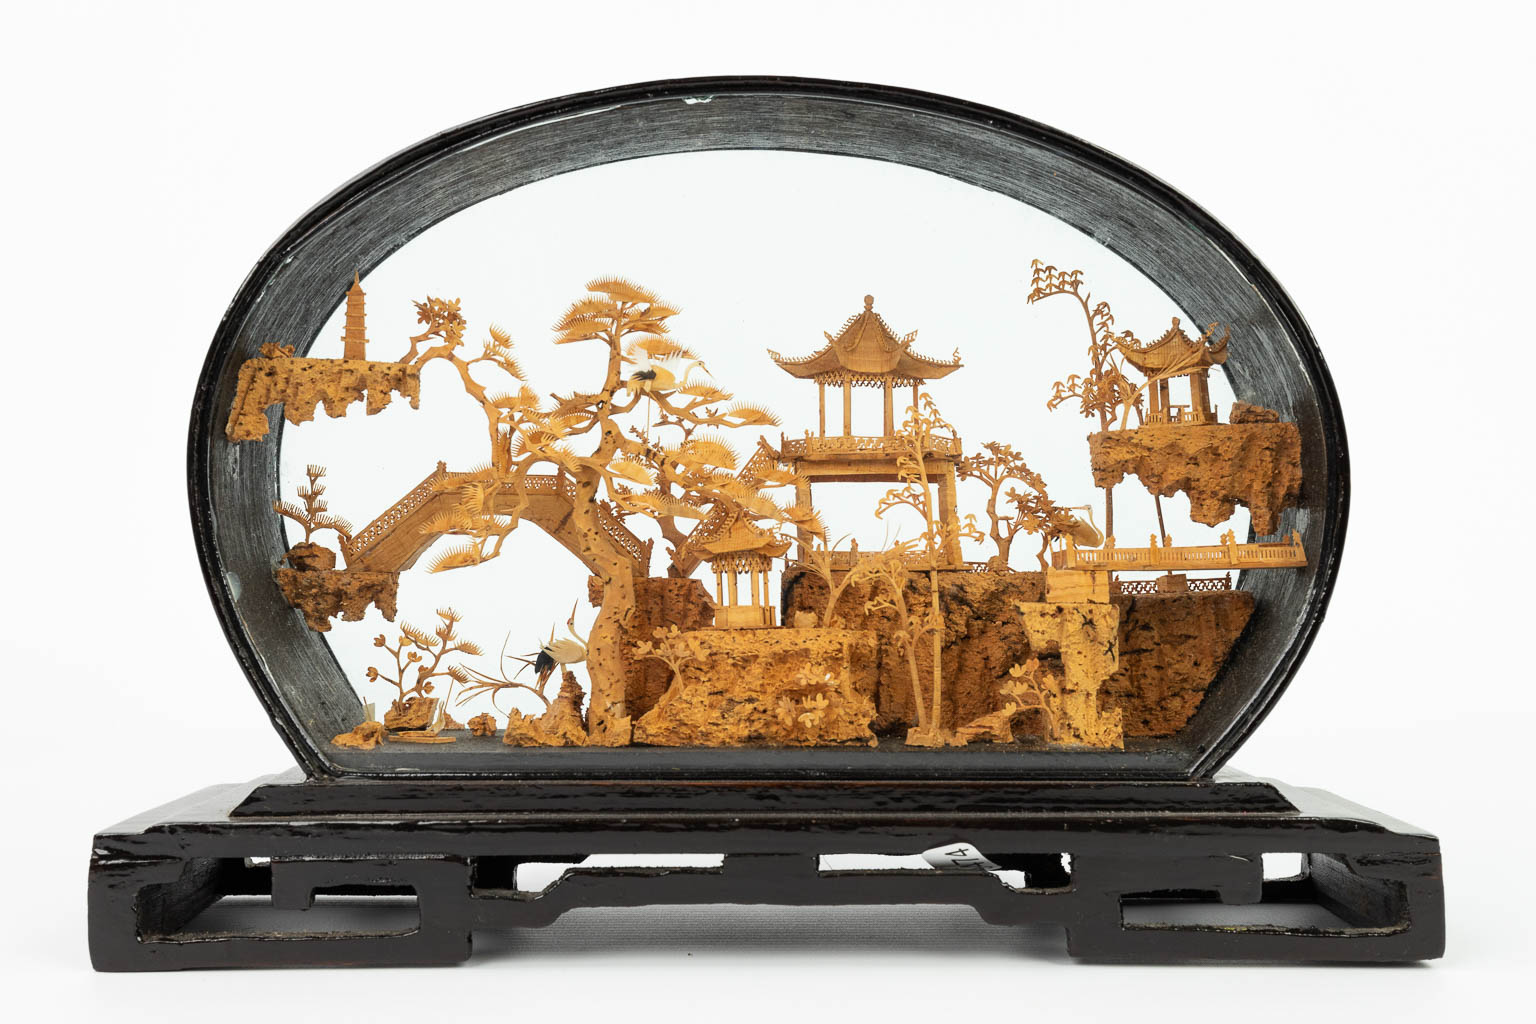 An assembled collection of Chinese items made of hardwood, porcelain of Chinese origin. (H:36cm)